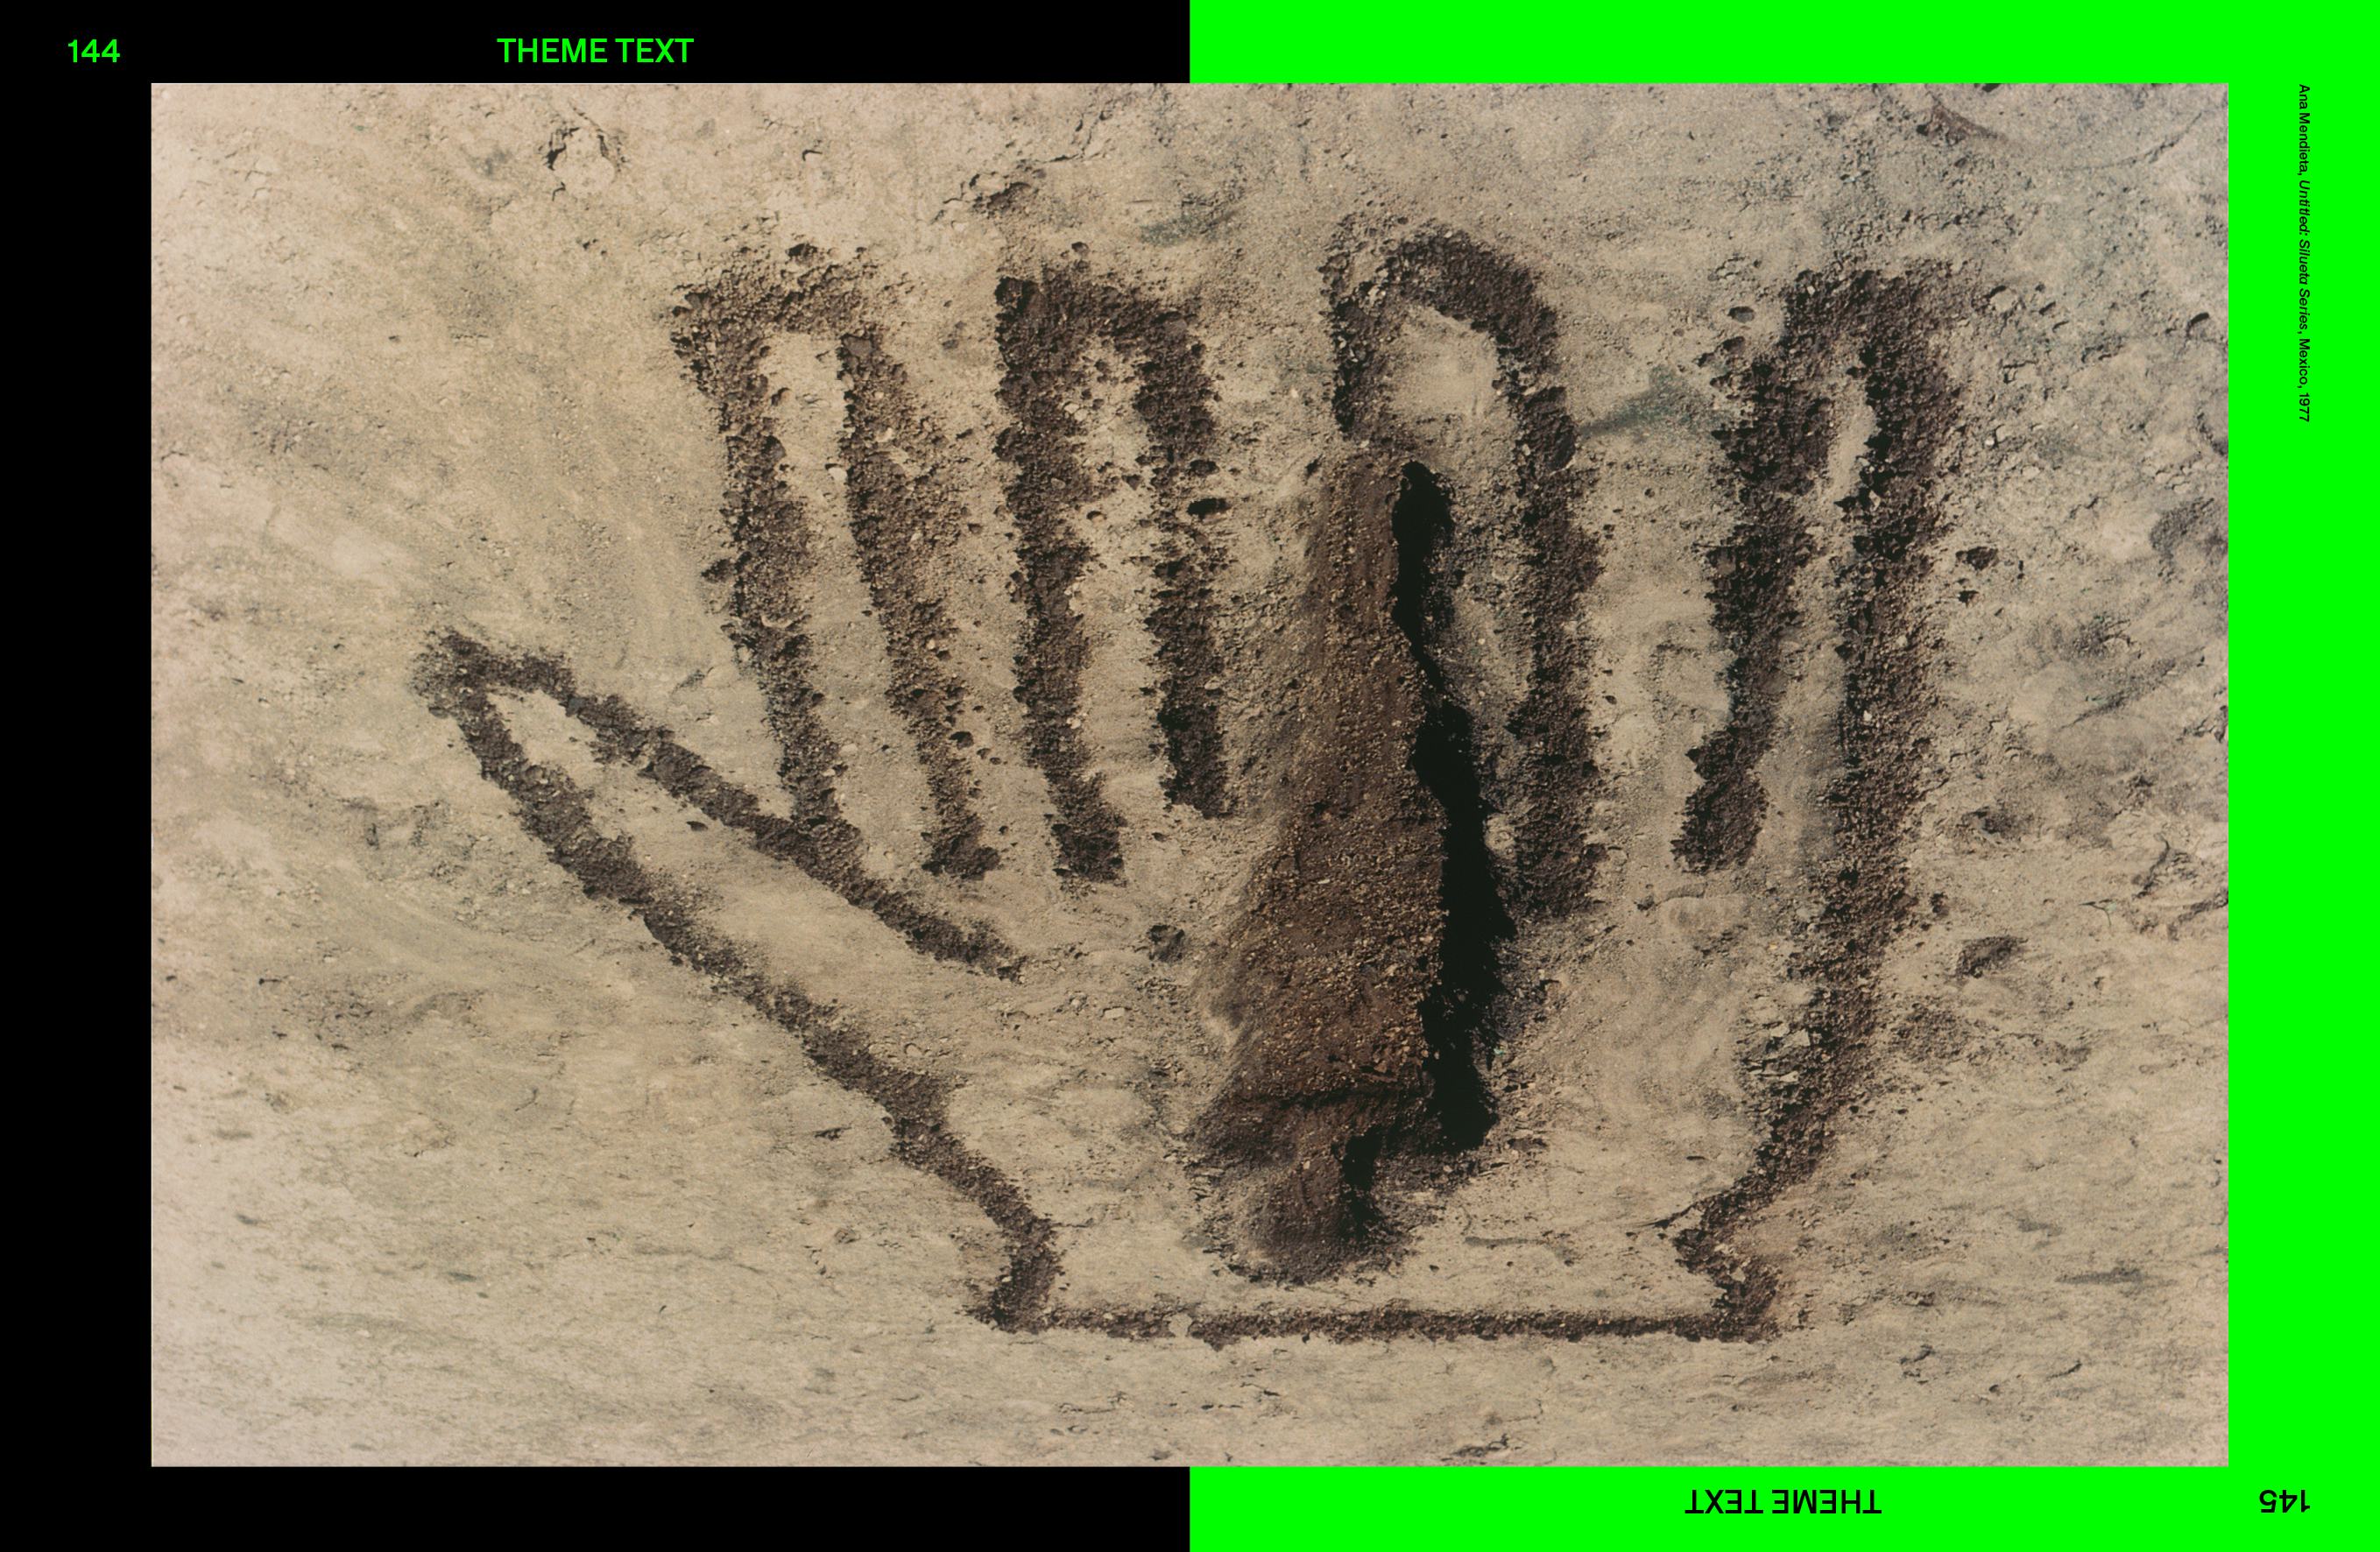 Spread of Foam Magazine #64: EXTREMES – The Environmental Issue, showing an image by Ana Mendieta of a large hand drawn in the earth.